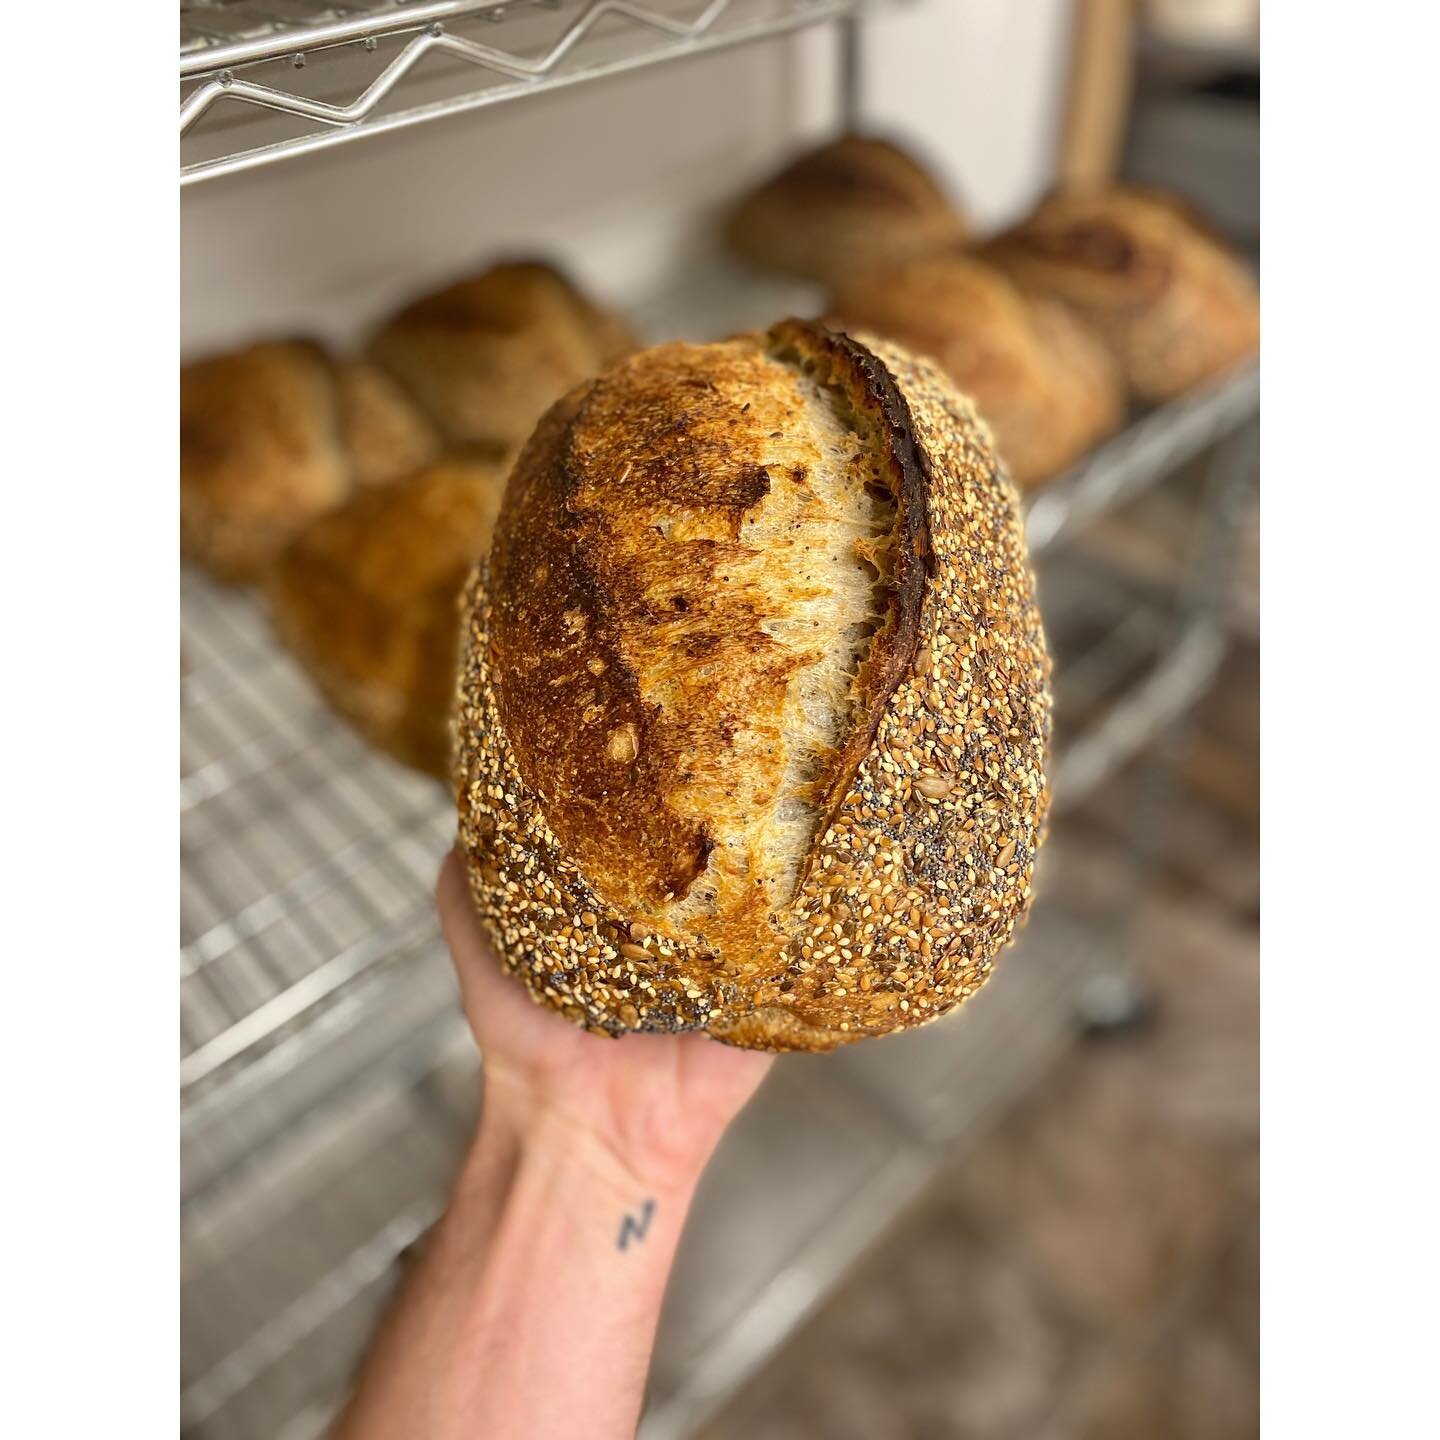 The birdbrain was voted Best Bread at the inaugural Denver Bake Fest yesterday and now you can get yours this week! Big thanks to @byron__edwards for helping to hand out bread, to @rebelbreaddenver for putting on an awesome event, @persistpublicity f